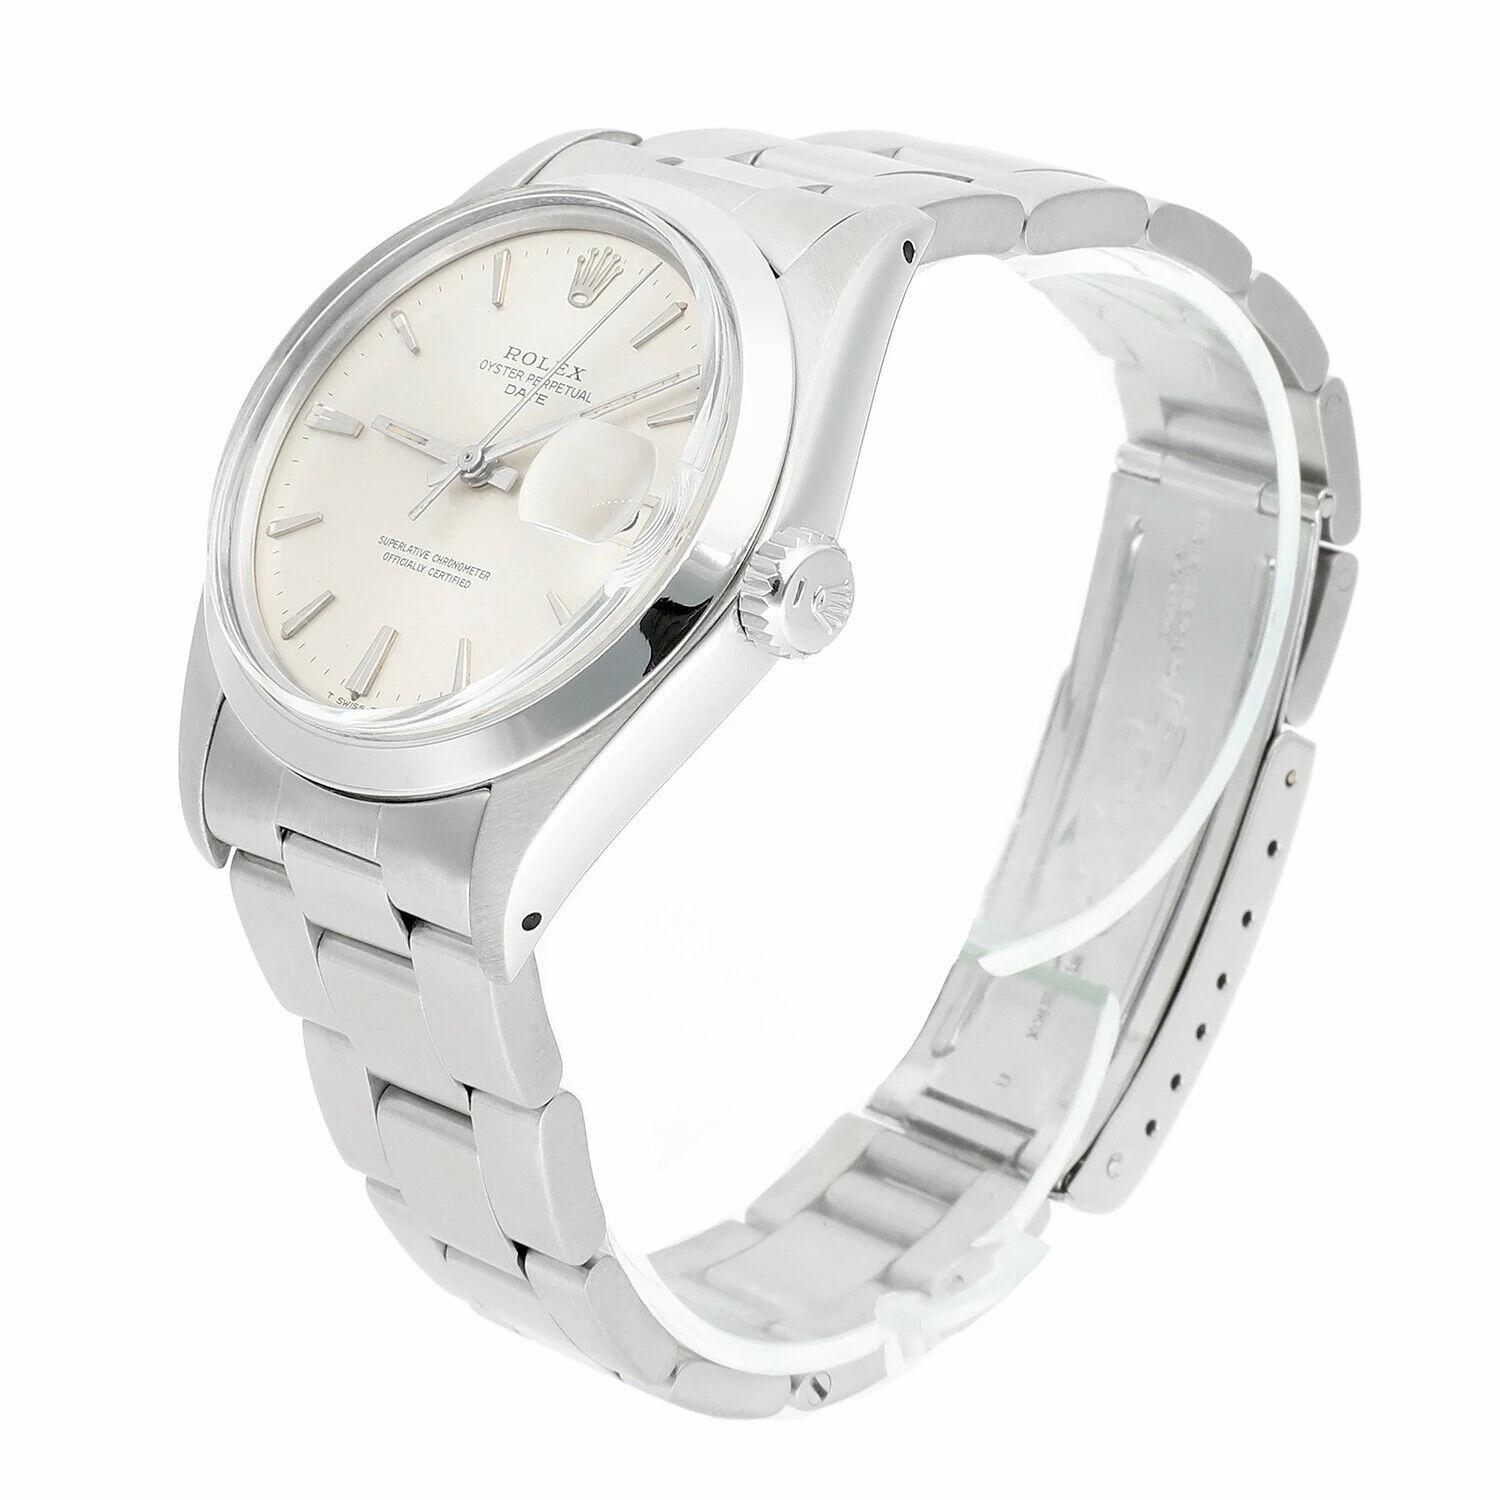 Rolex Date Stainless Steel Silver Dial Vintage Watch 1500 Circa 1978 In Excellent Condition For Sale In New York, NY